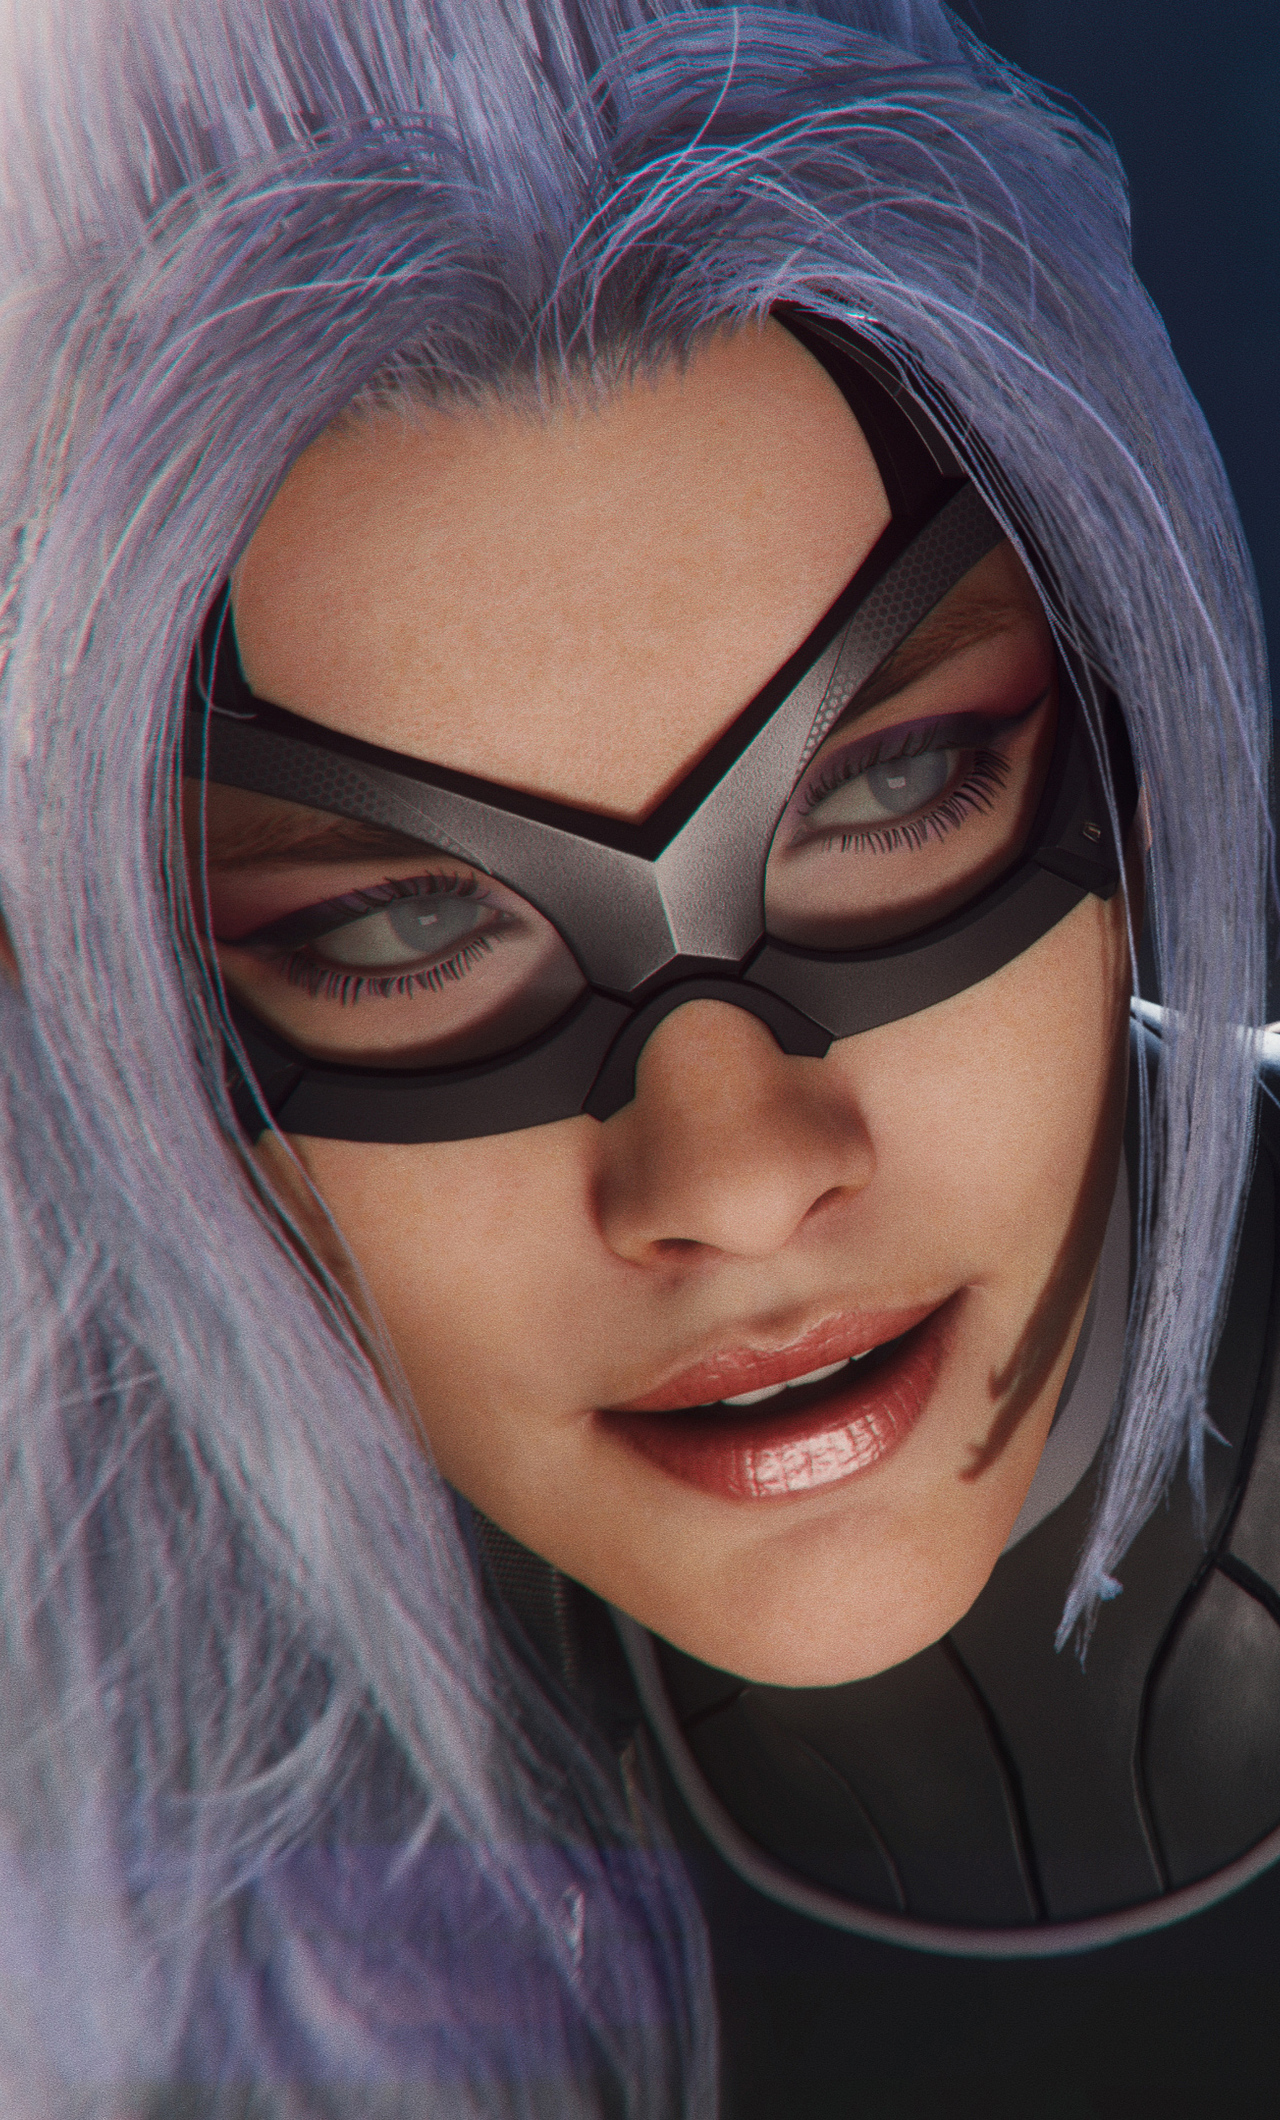 Felicia Hardy As Black Cat In Spiderman Ps4 iPhone